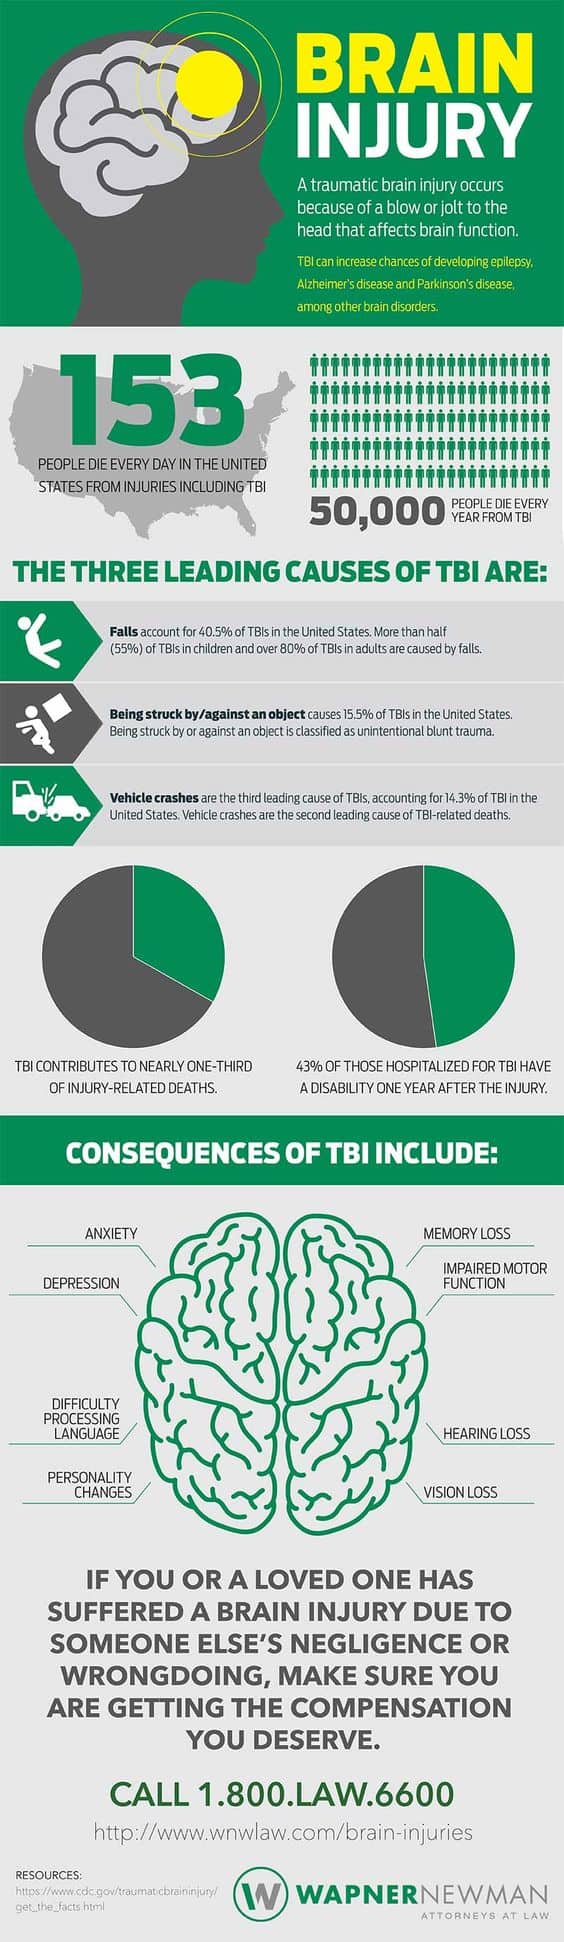 infographic describes prevalence and consequences of traumatic brain injury